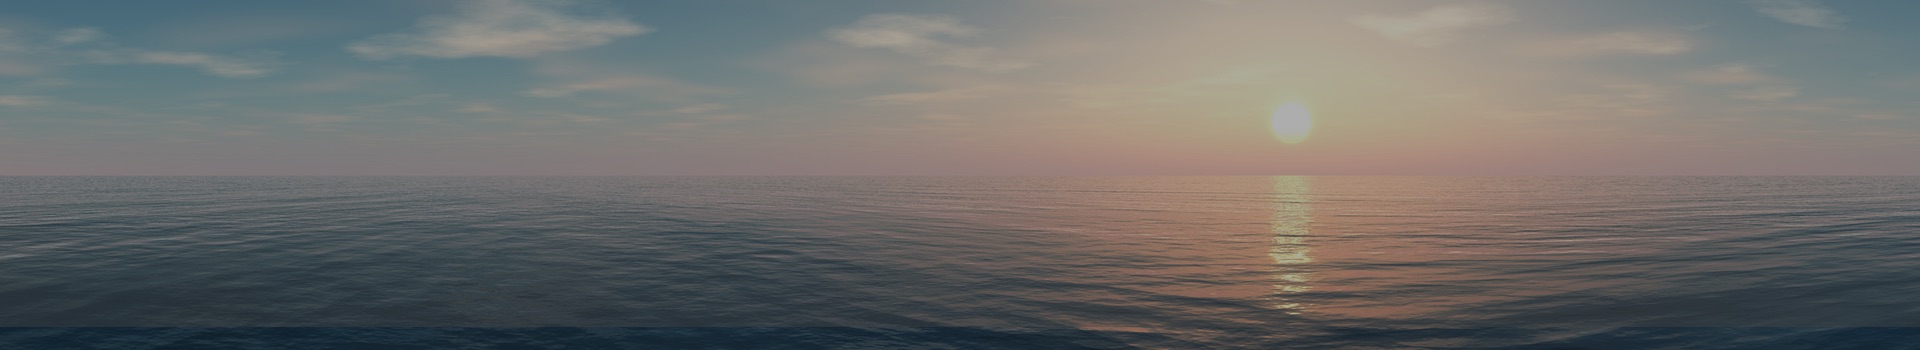 Image of the ocean at sunset